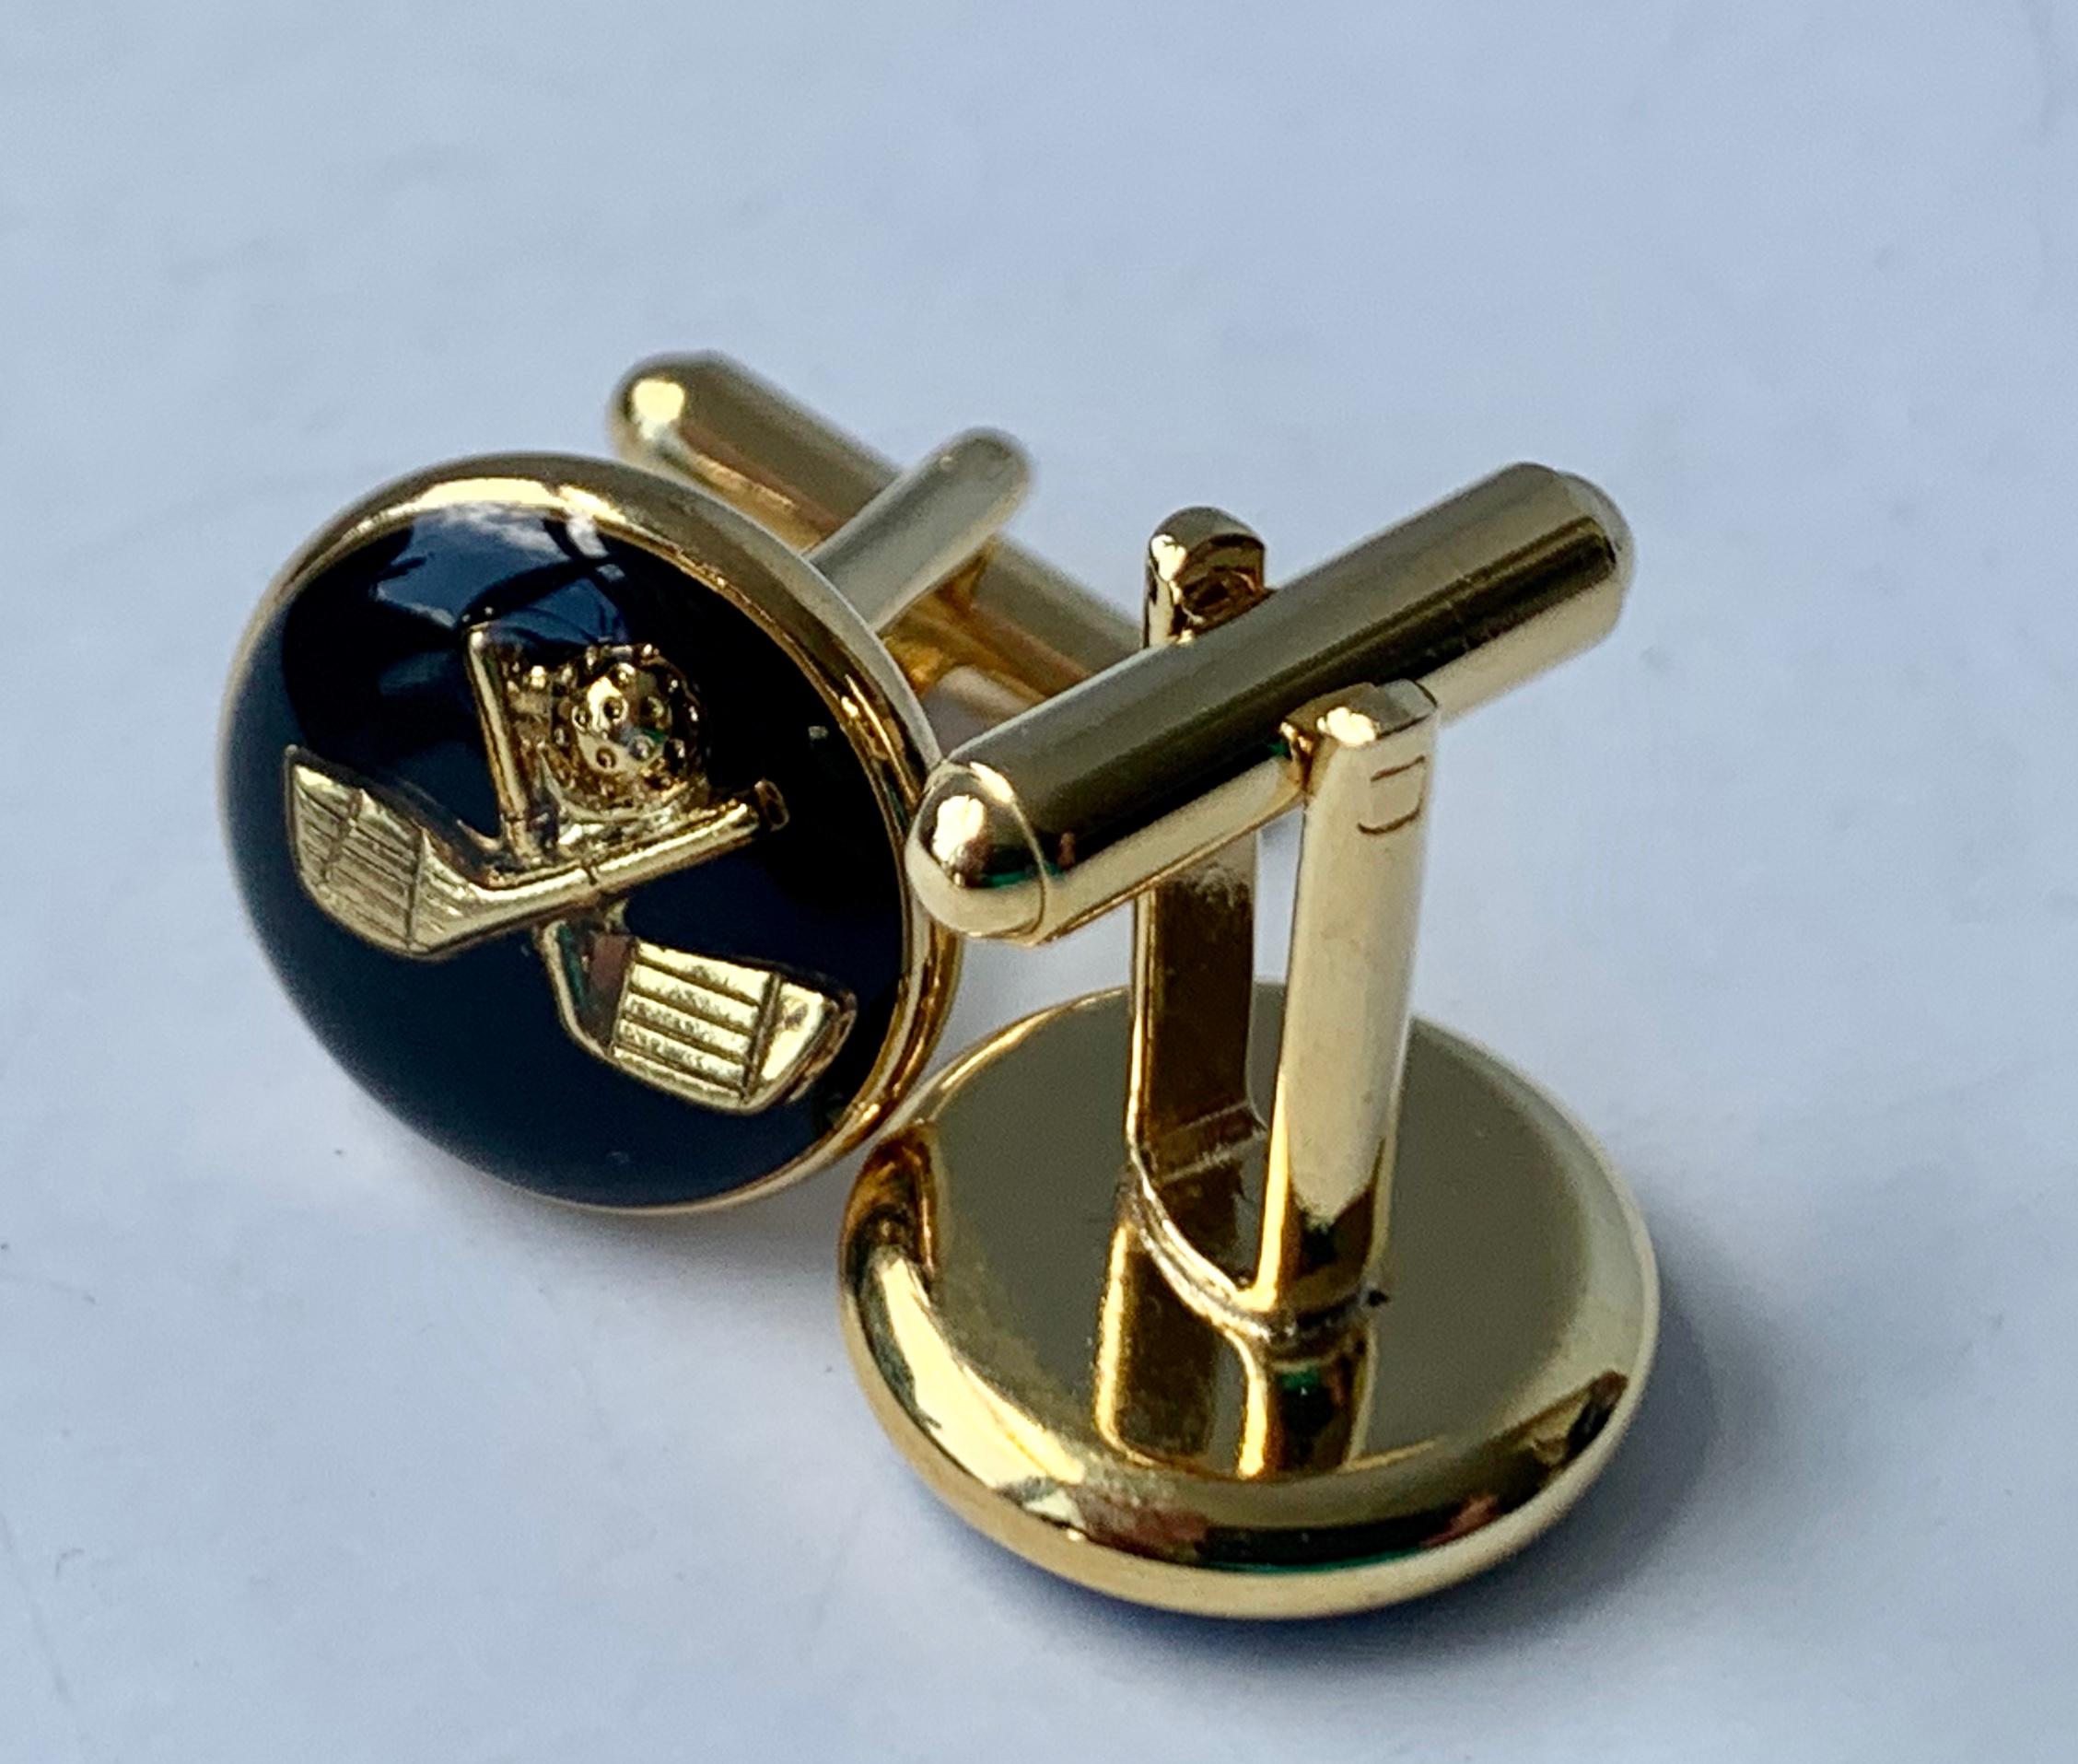 A Pair of Cufflinks with Golf Clubs & Ball on a Black Ground with 